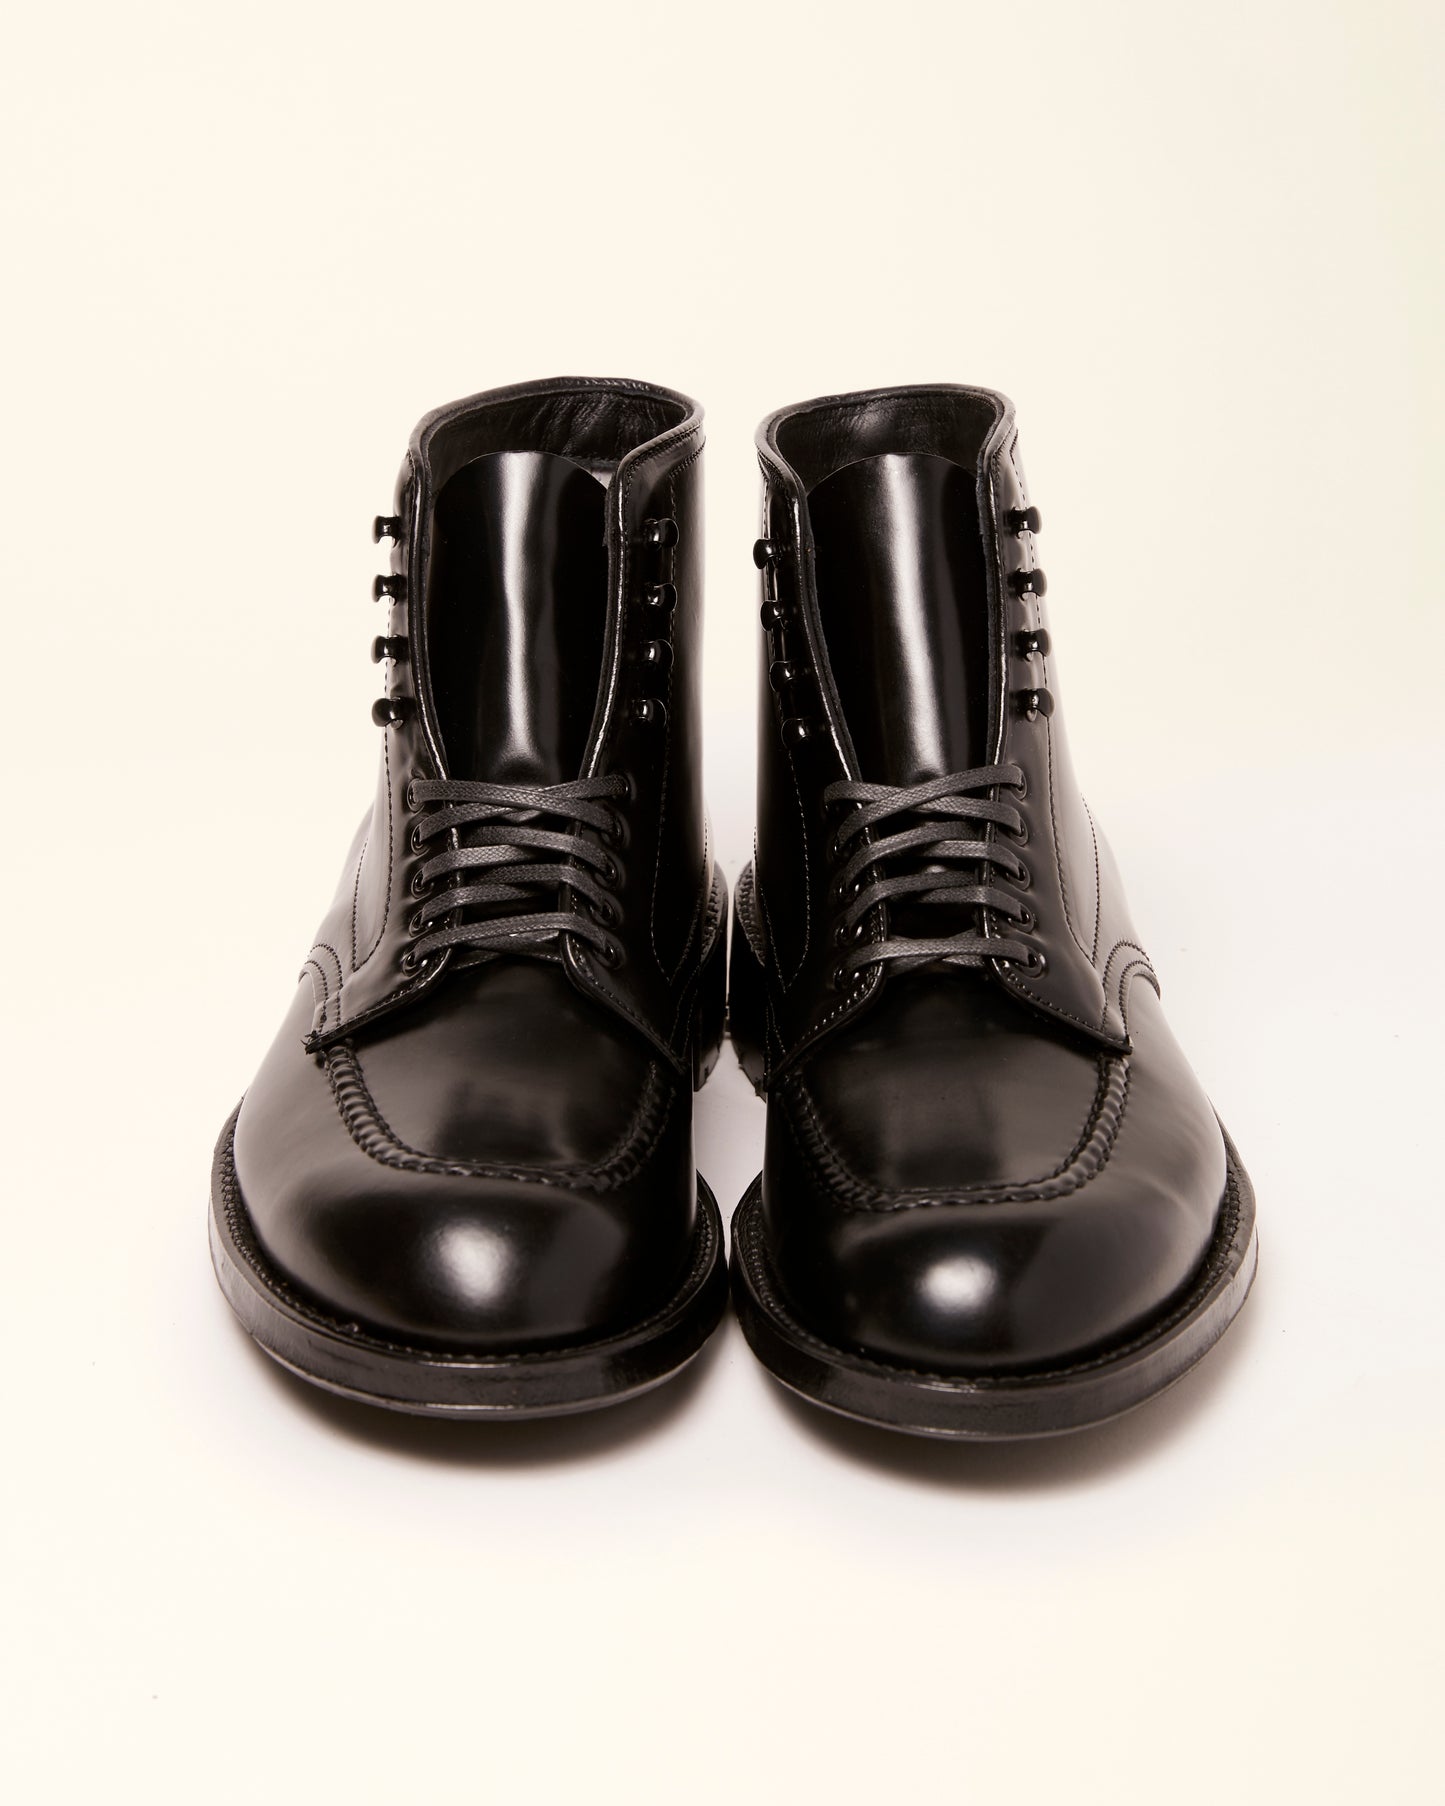 “Neptune” Black Shell Cordovan Handsewn Indy Boot